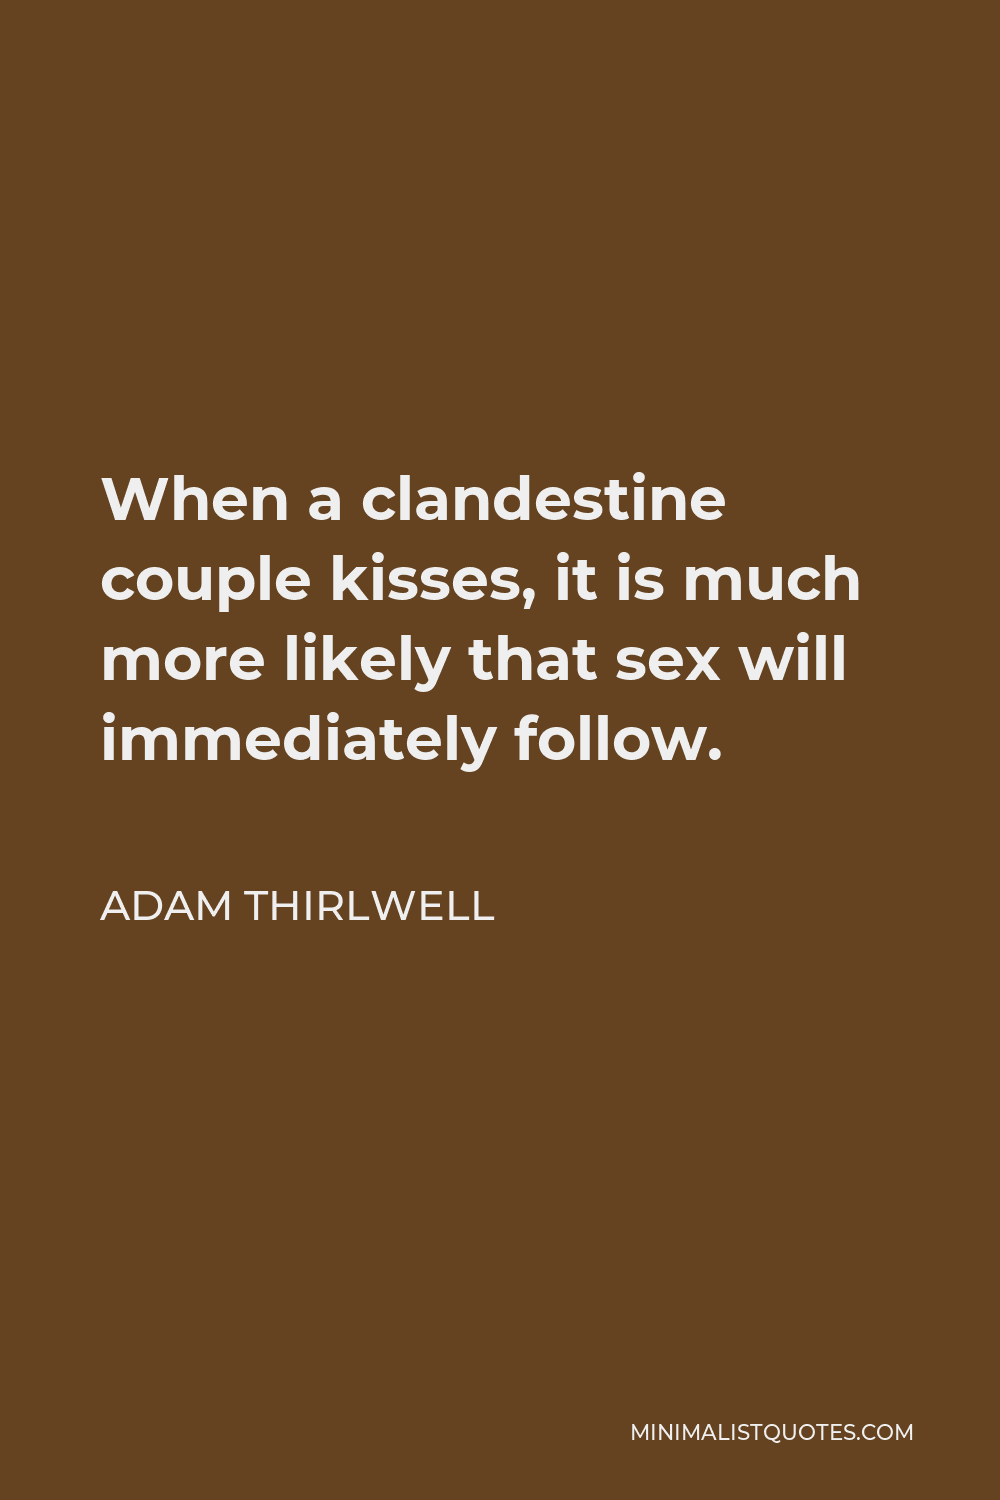 Adam Thirlwell Quote - When a clandestine couple kisses, it is much more likely that sex will immediately follow.